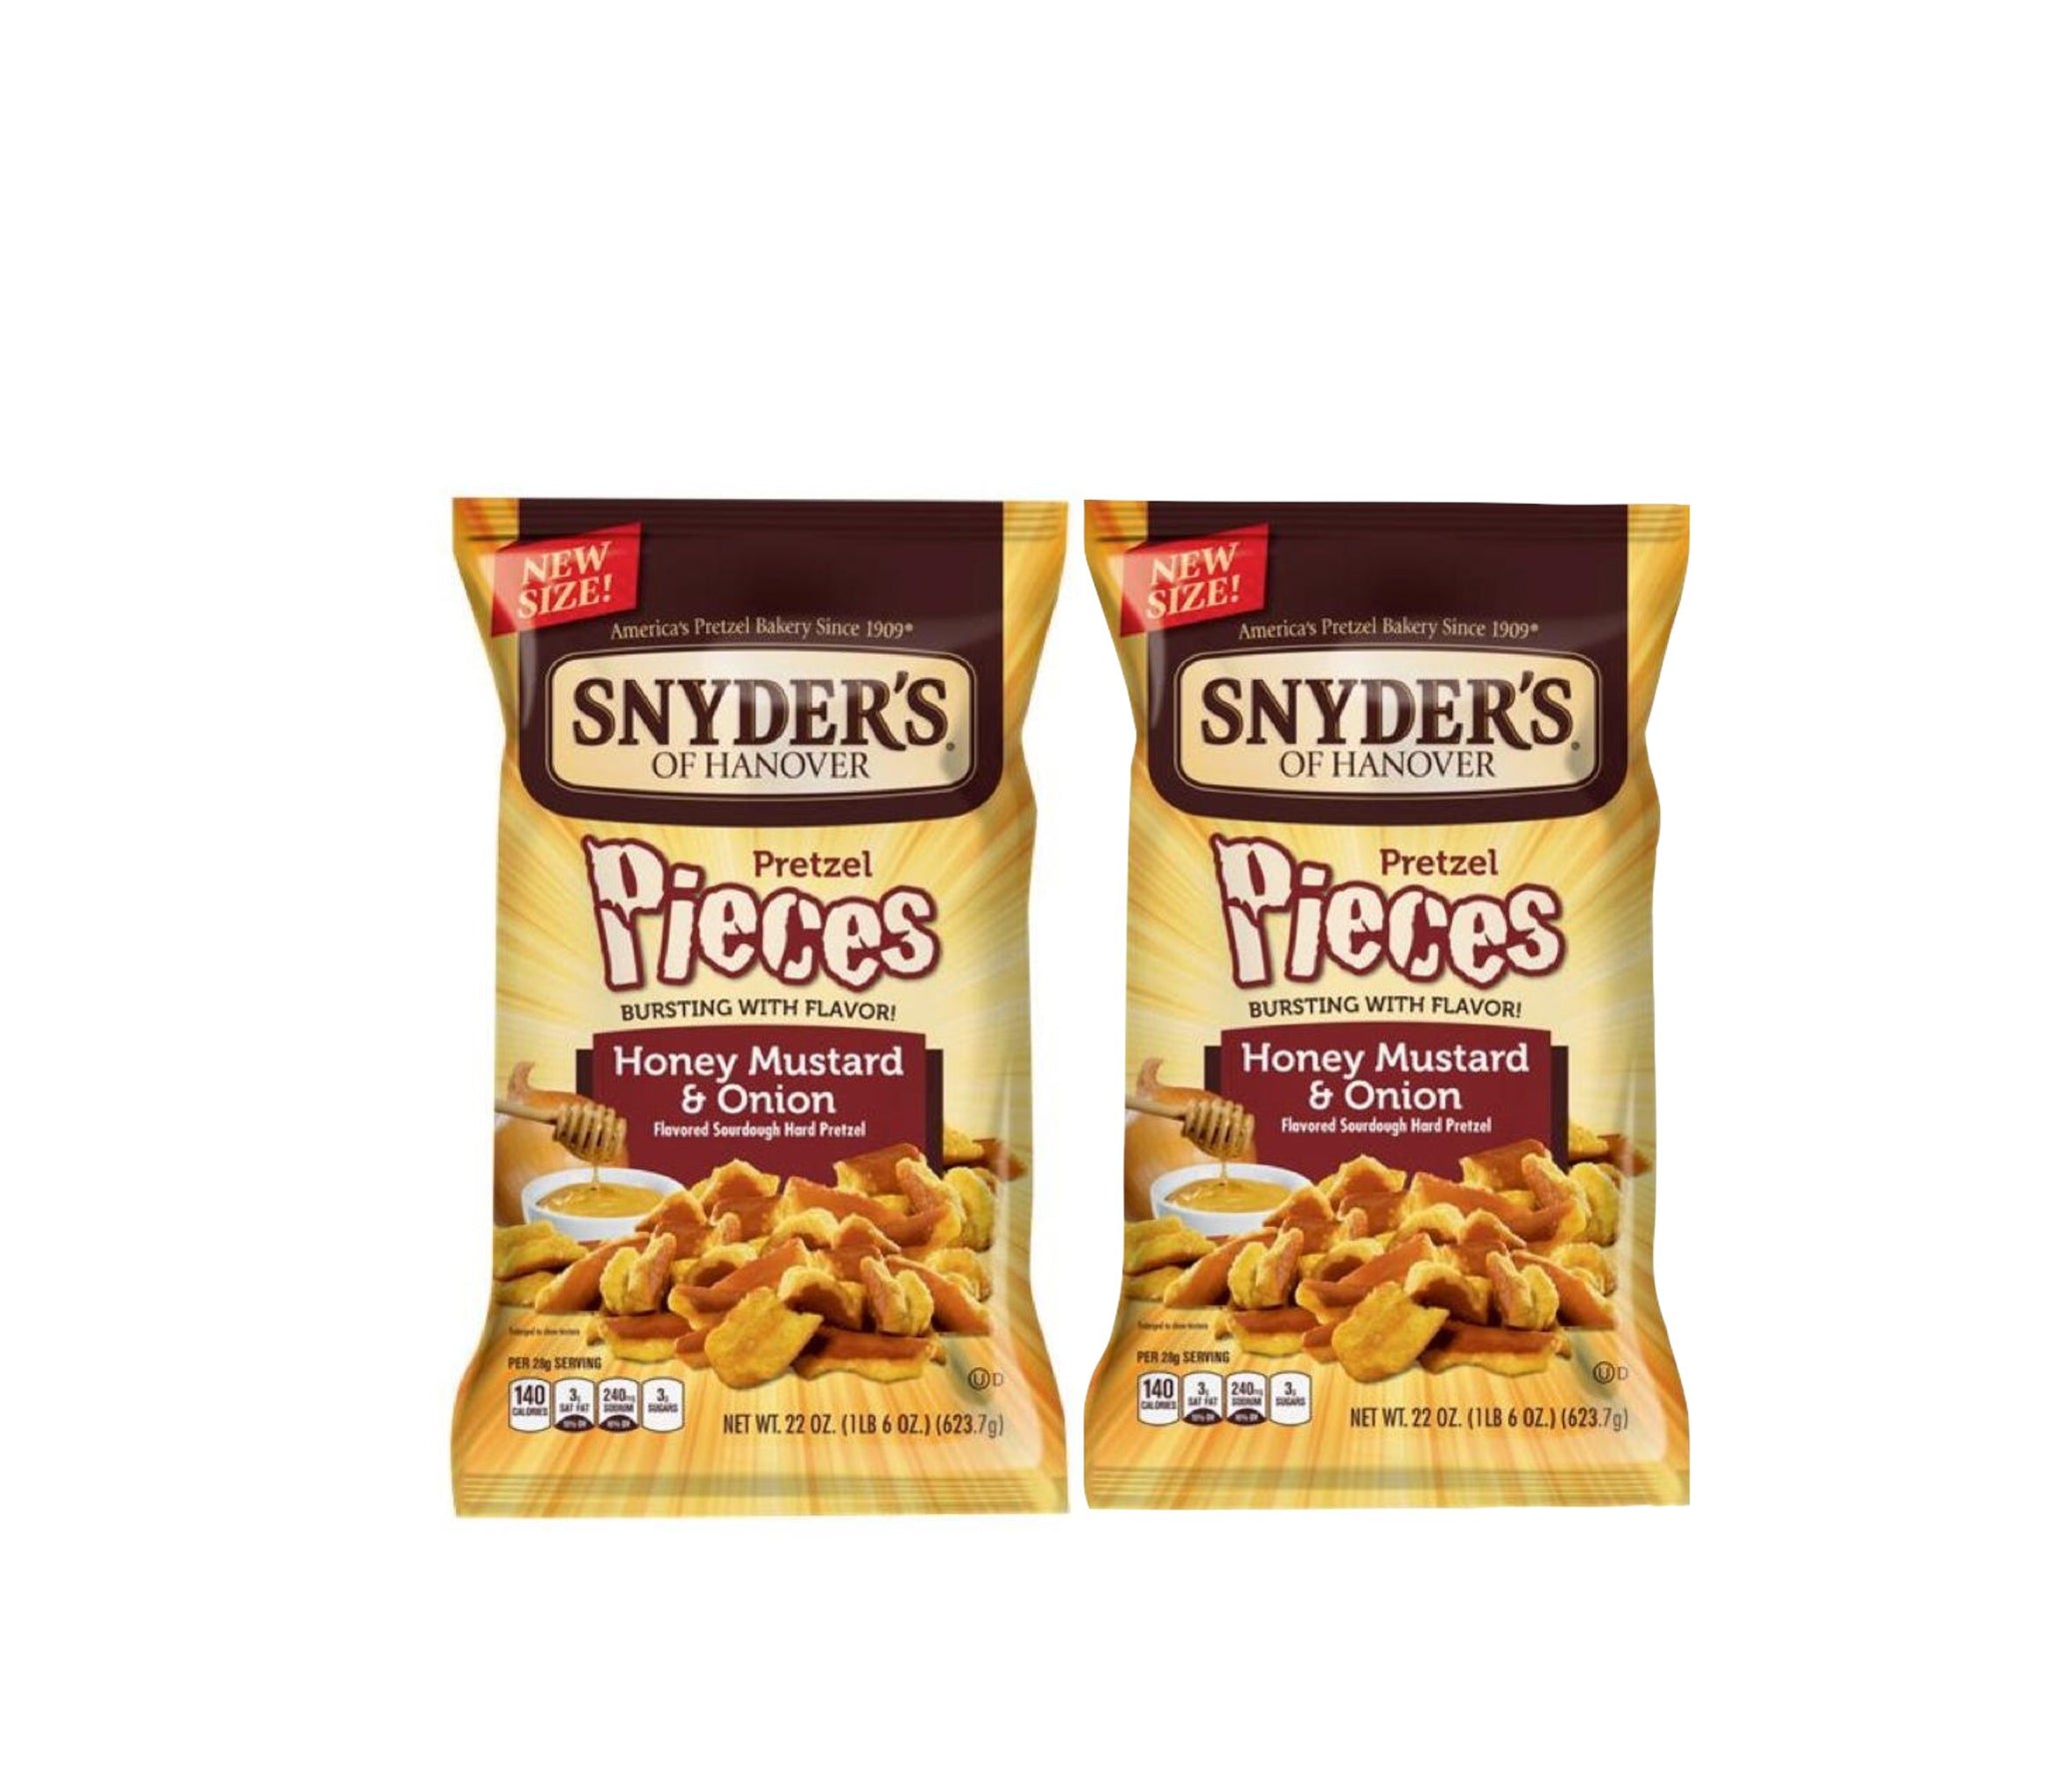 Snyder's of Hanover Quality Pretzel Pieces with Honey Mustard & Onion Flavor, New Size ( Each Pack) (Pack of 2)